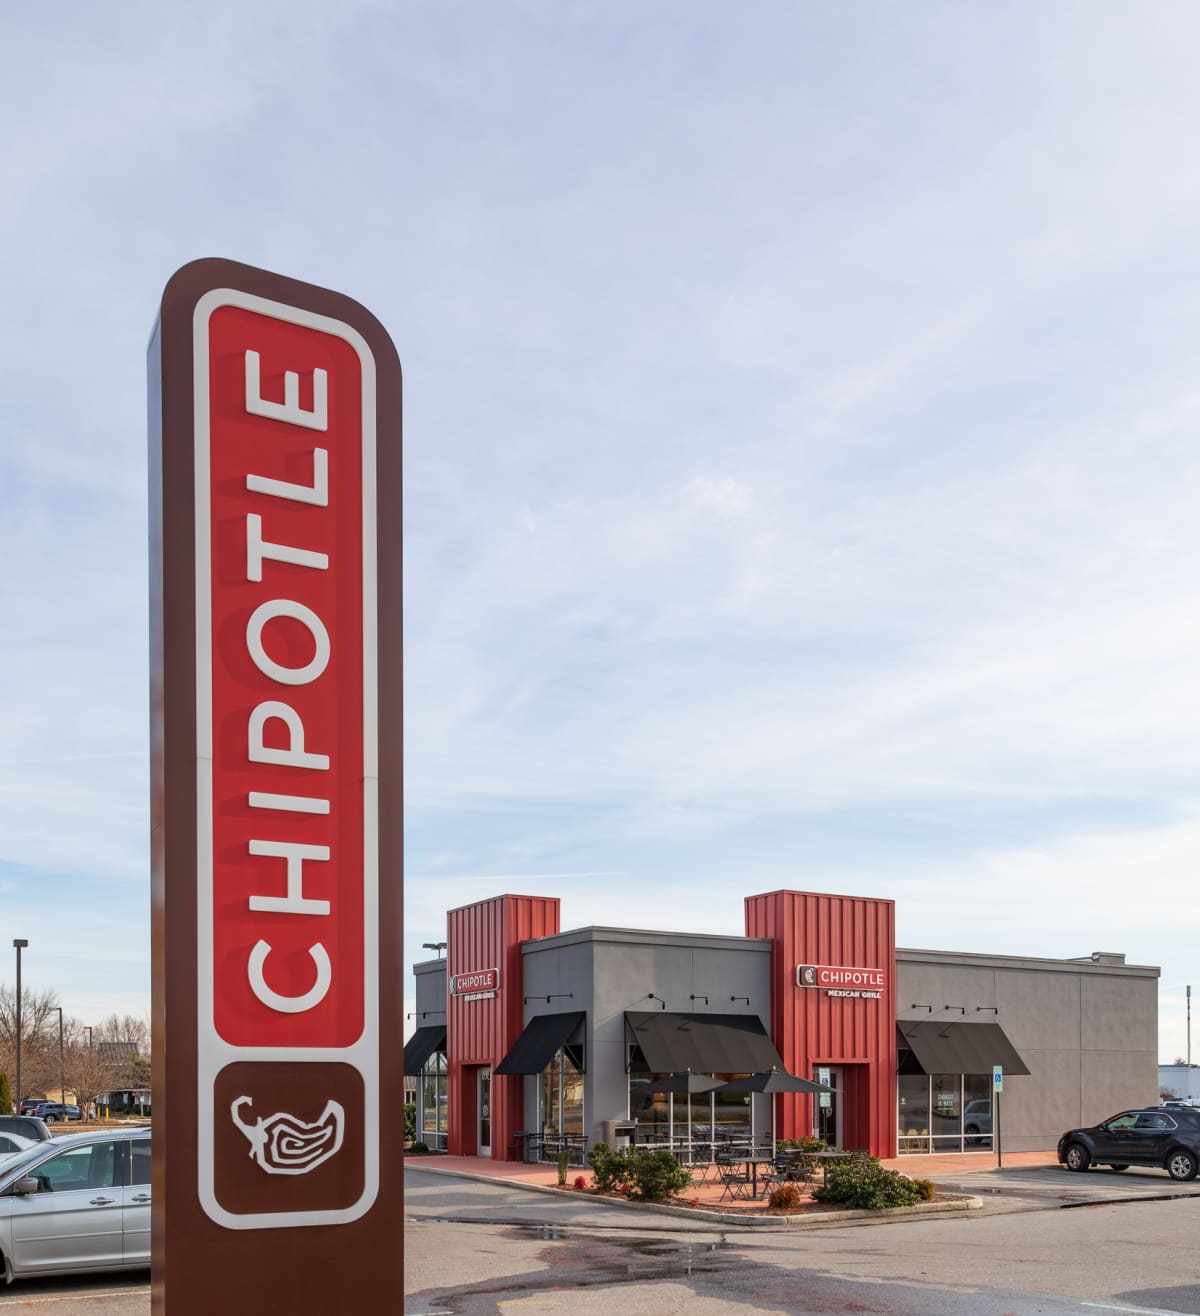 A Chipotle outlet.